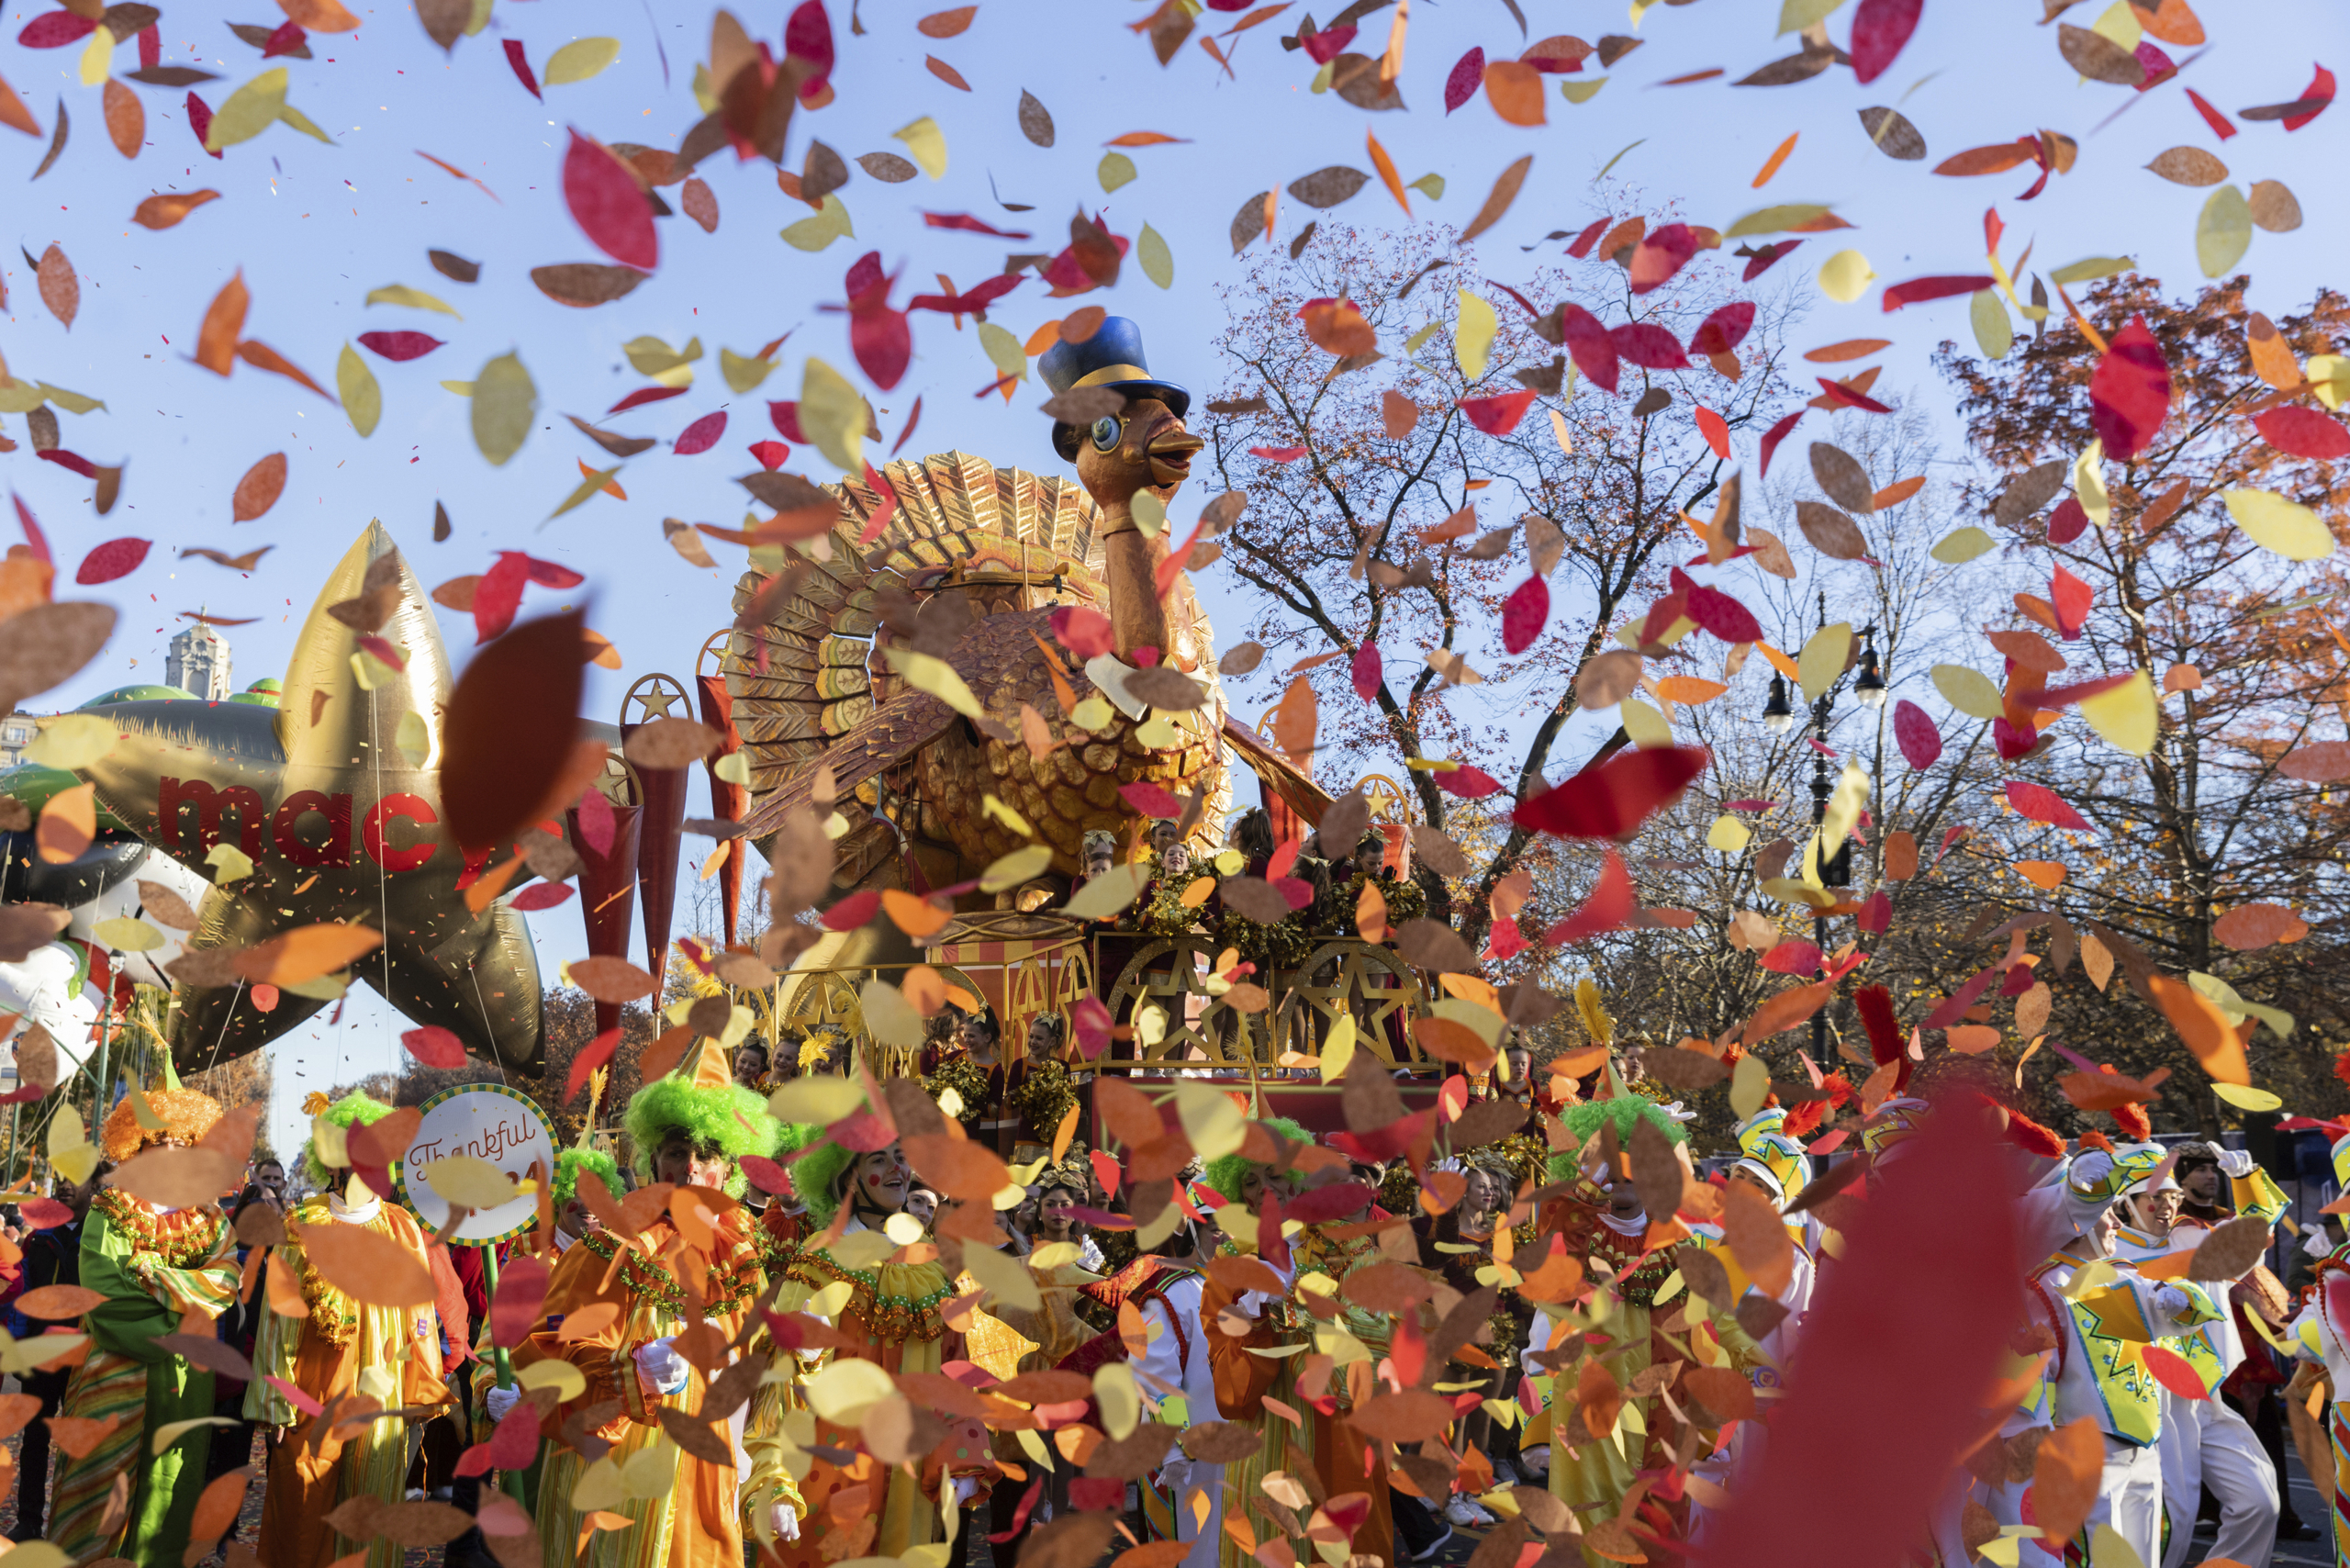 Parade performers lead the Tom Turkey float down Central Park West at the start of the Macy's Thanksgiving Day parade, Thursday, Nov. 23, 2023, in New York. (AP Photo/Jeenah Moon)